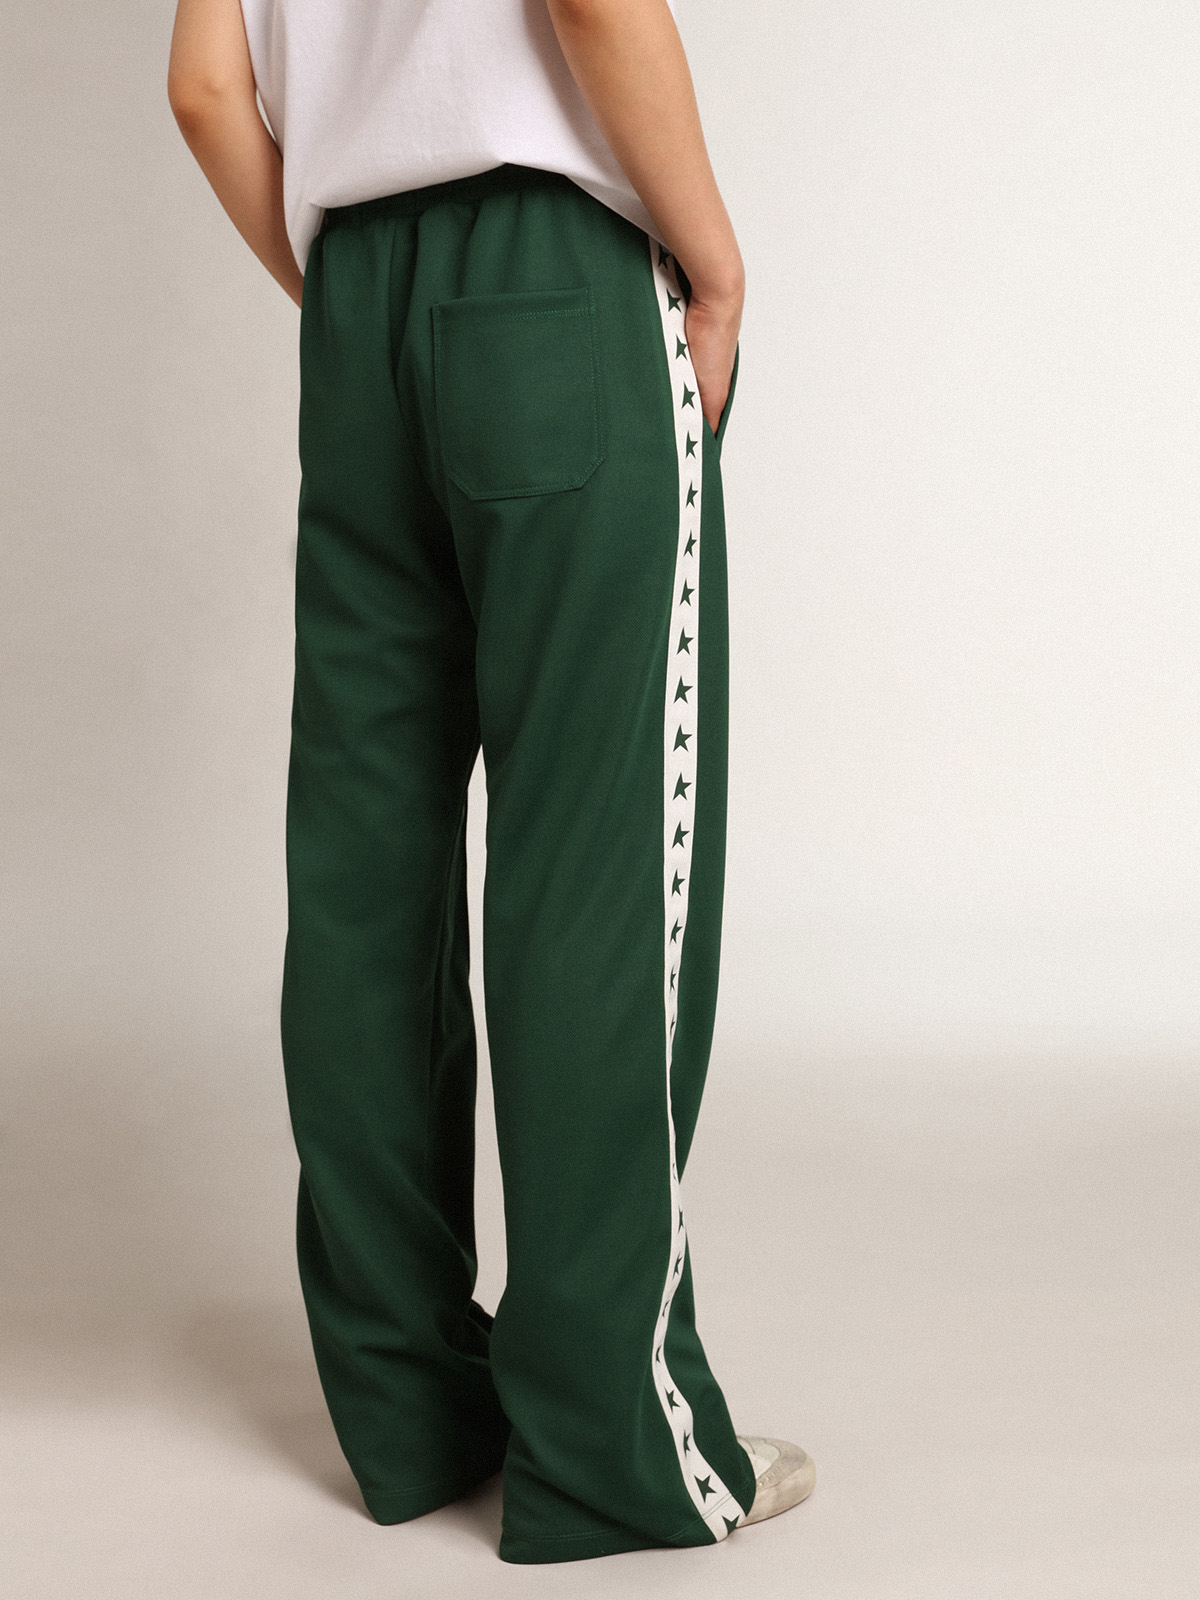 Women's bright green joggers with band and stars | Golden Goose